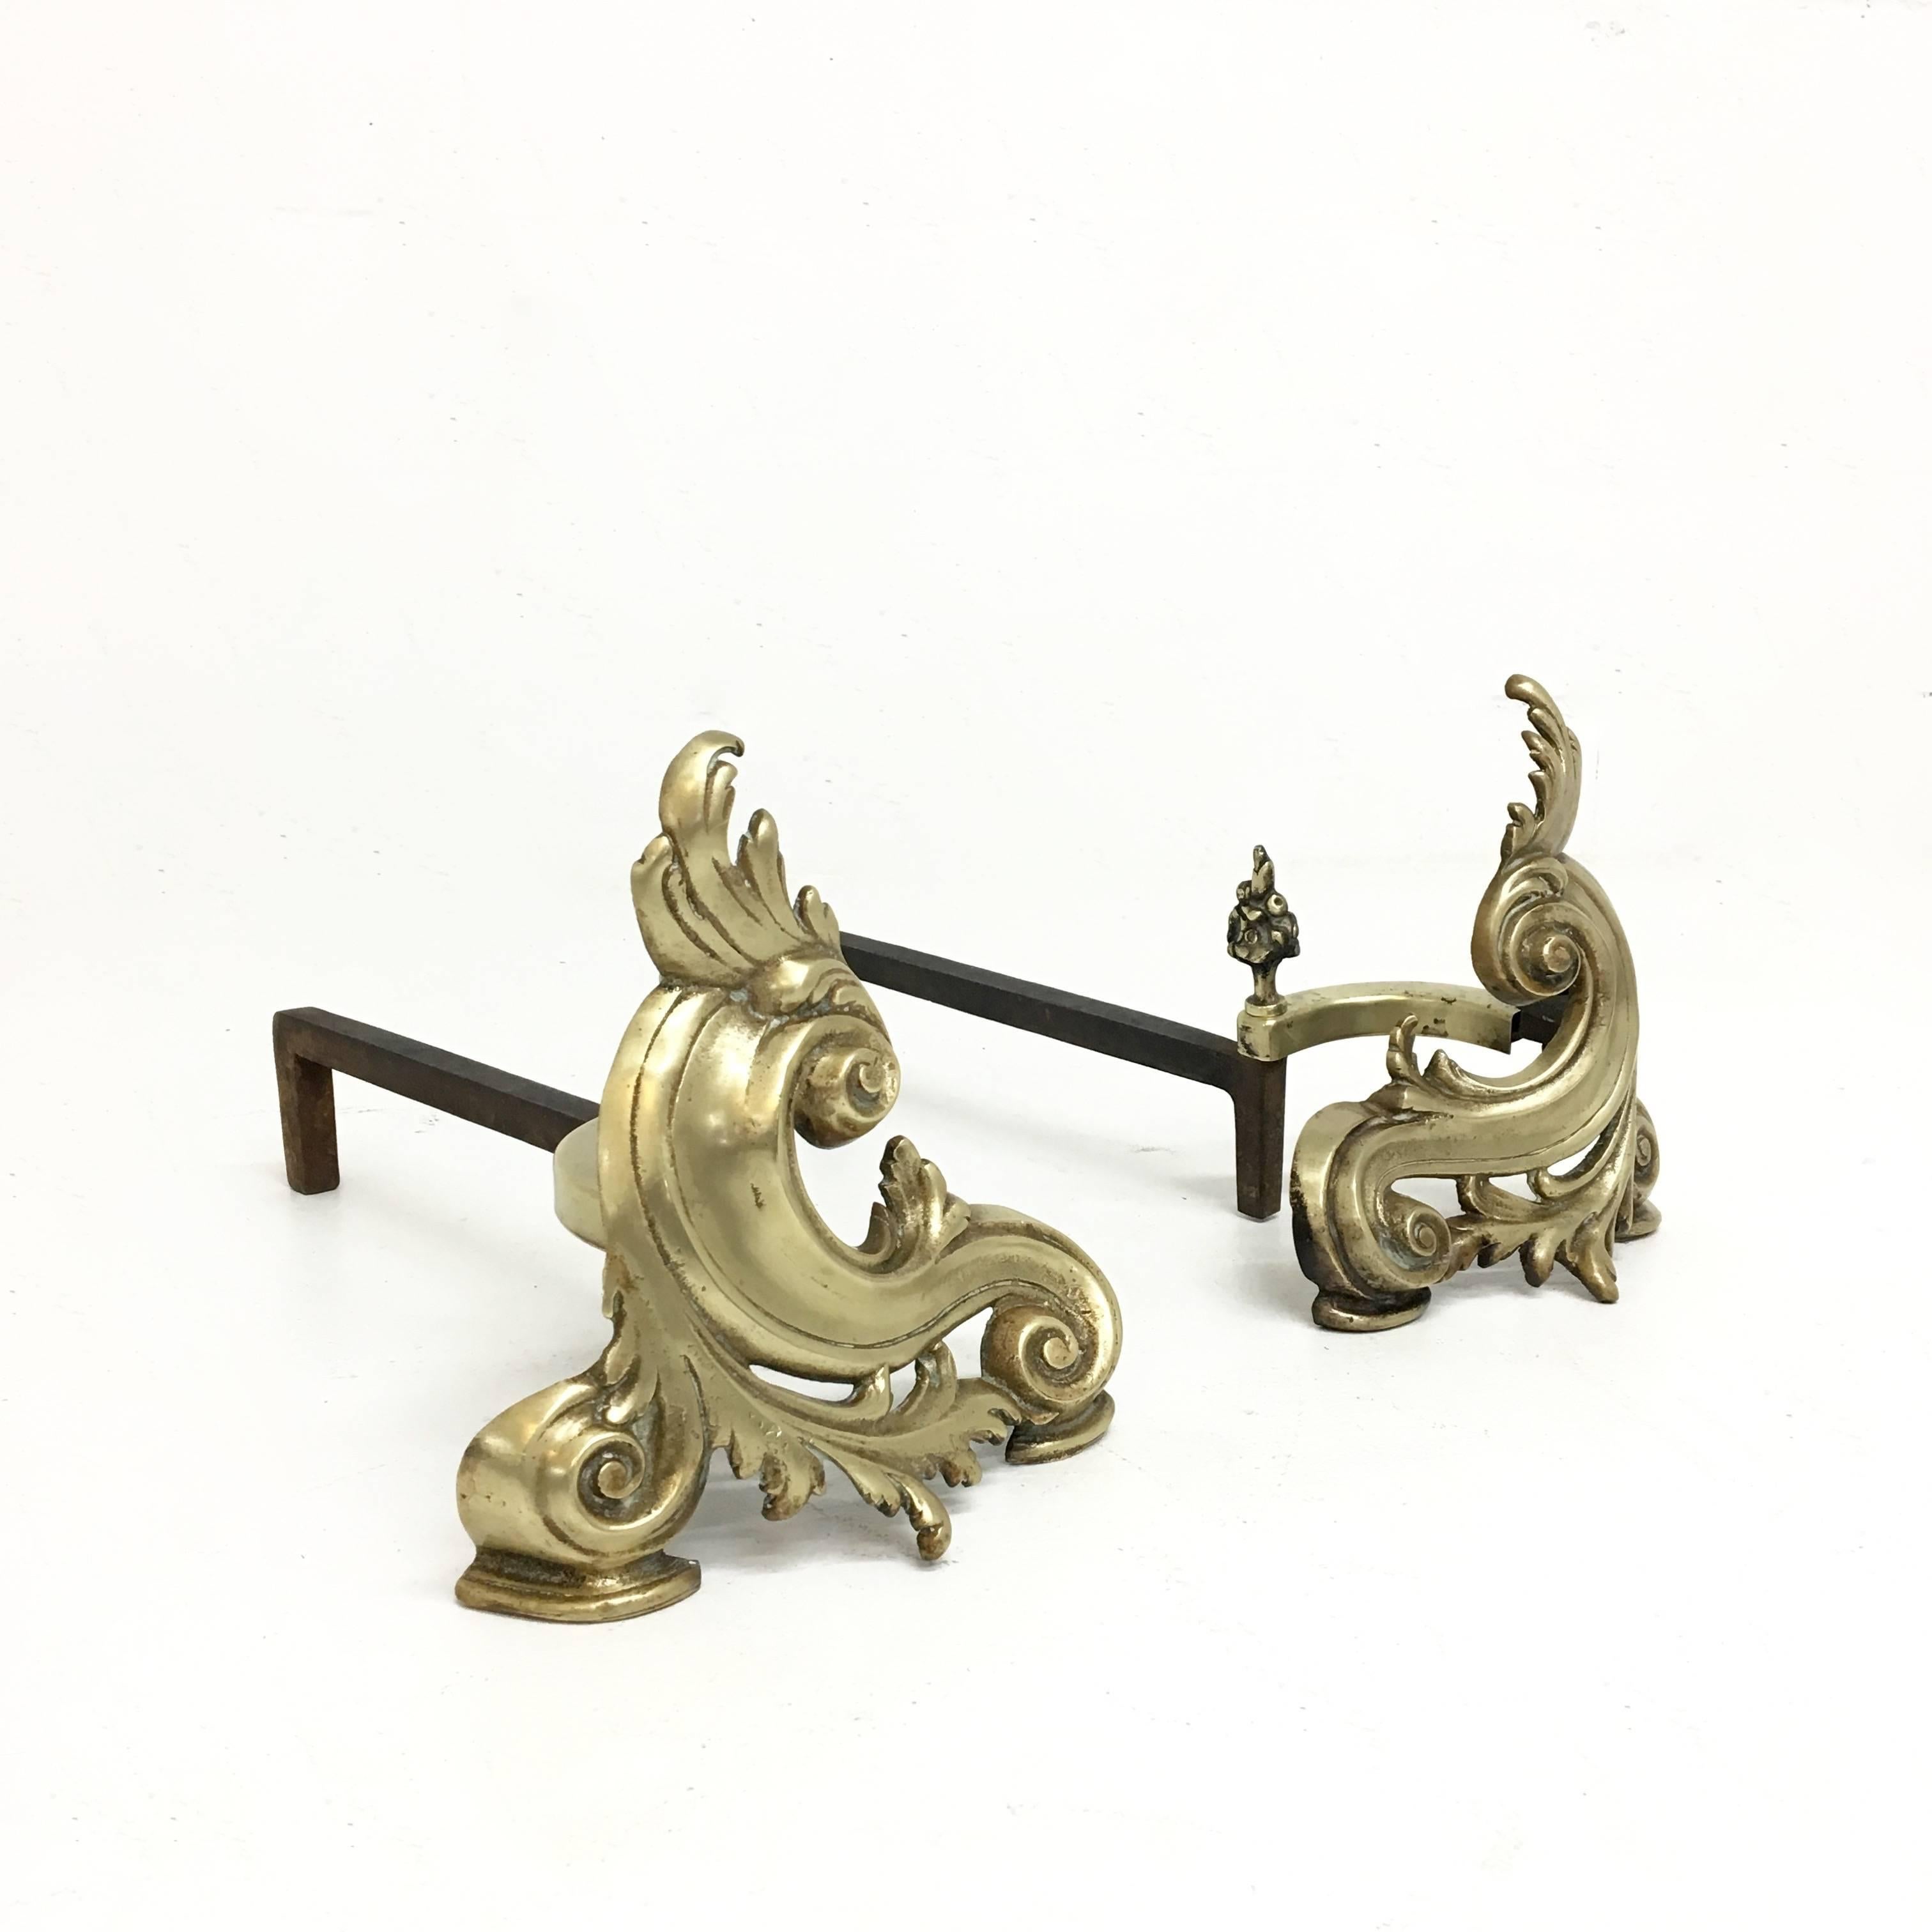 Decorative pair of brass chenets or andirons form the late 19th century in the style of Louis XV with Baroque flourishes.